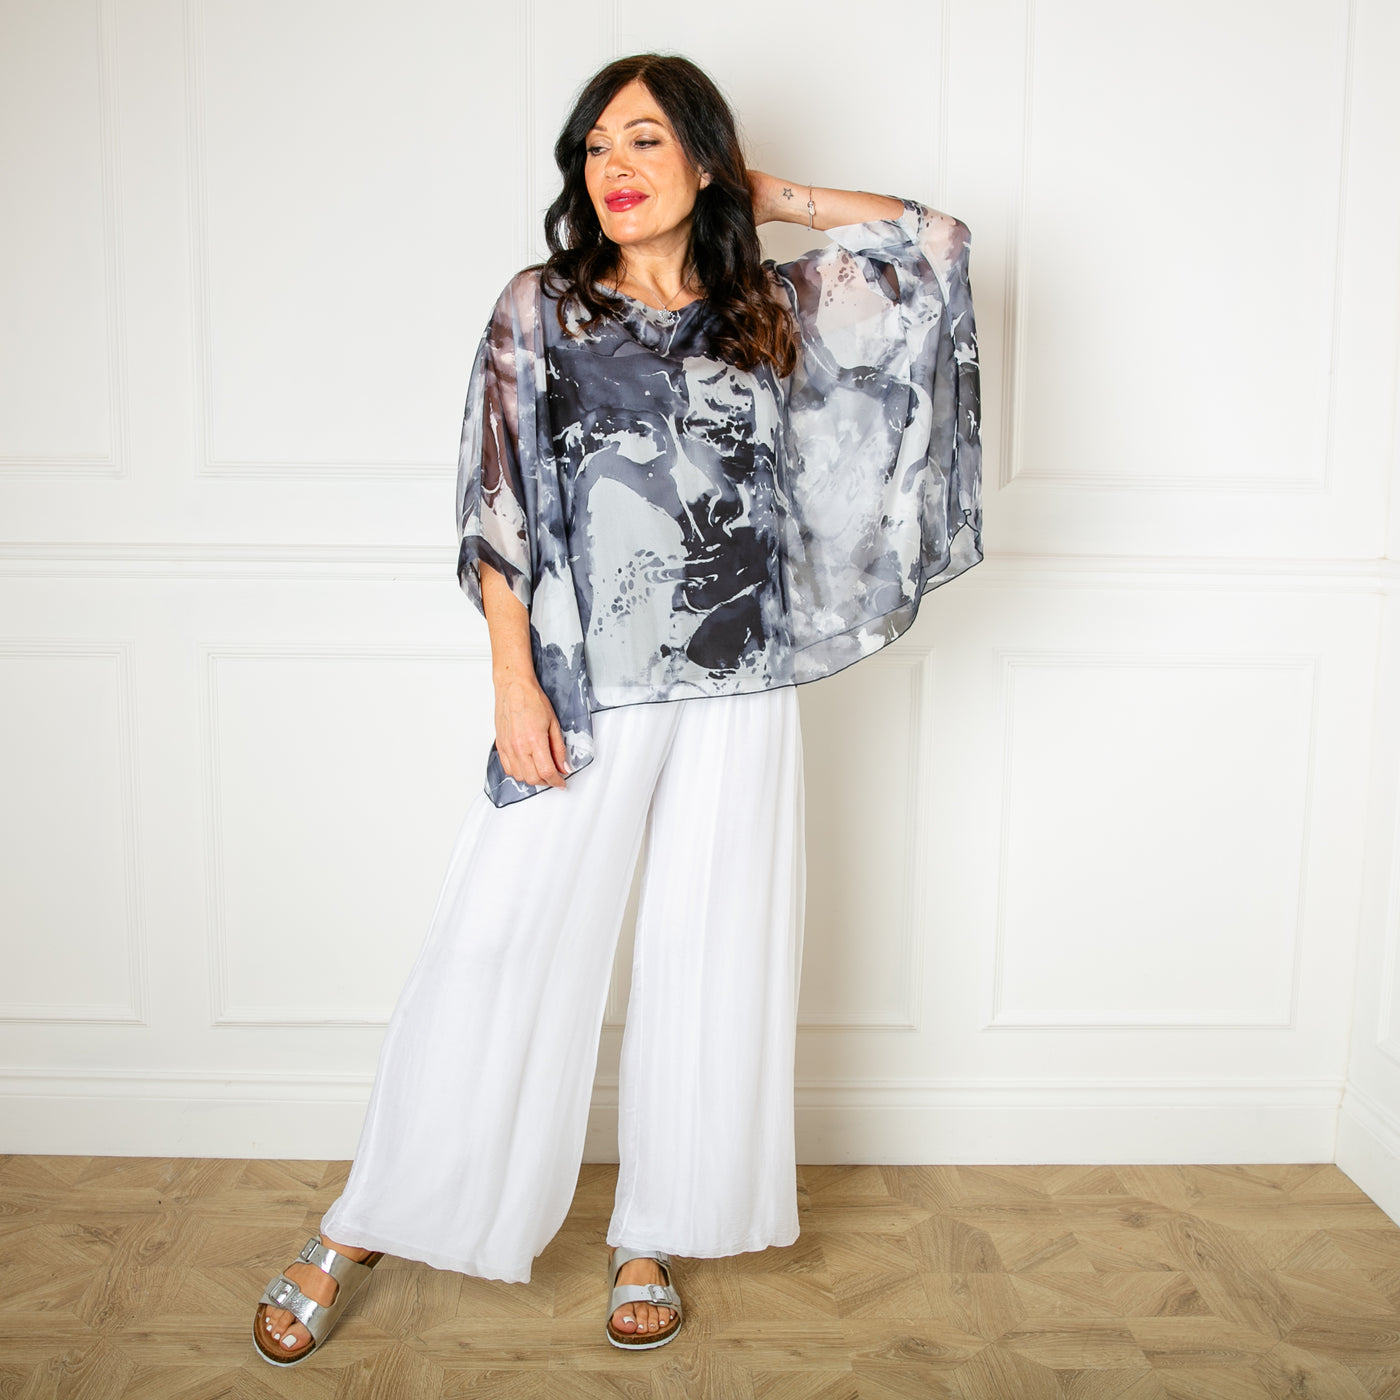 The charcoal grey Ink Blot Blouse made up of a lightweight silky material and a stretchy lining underneath